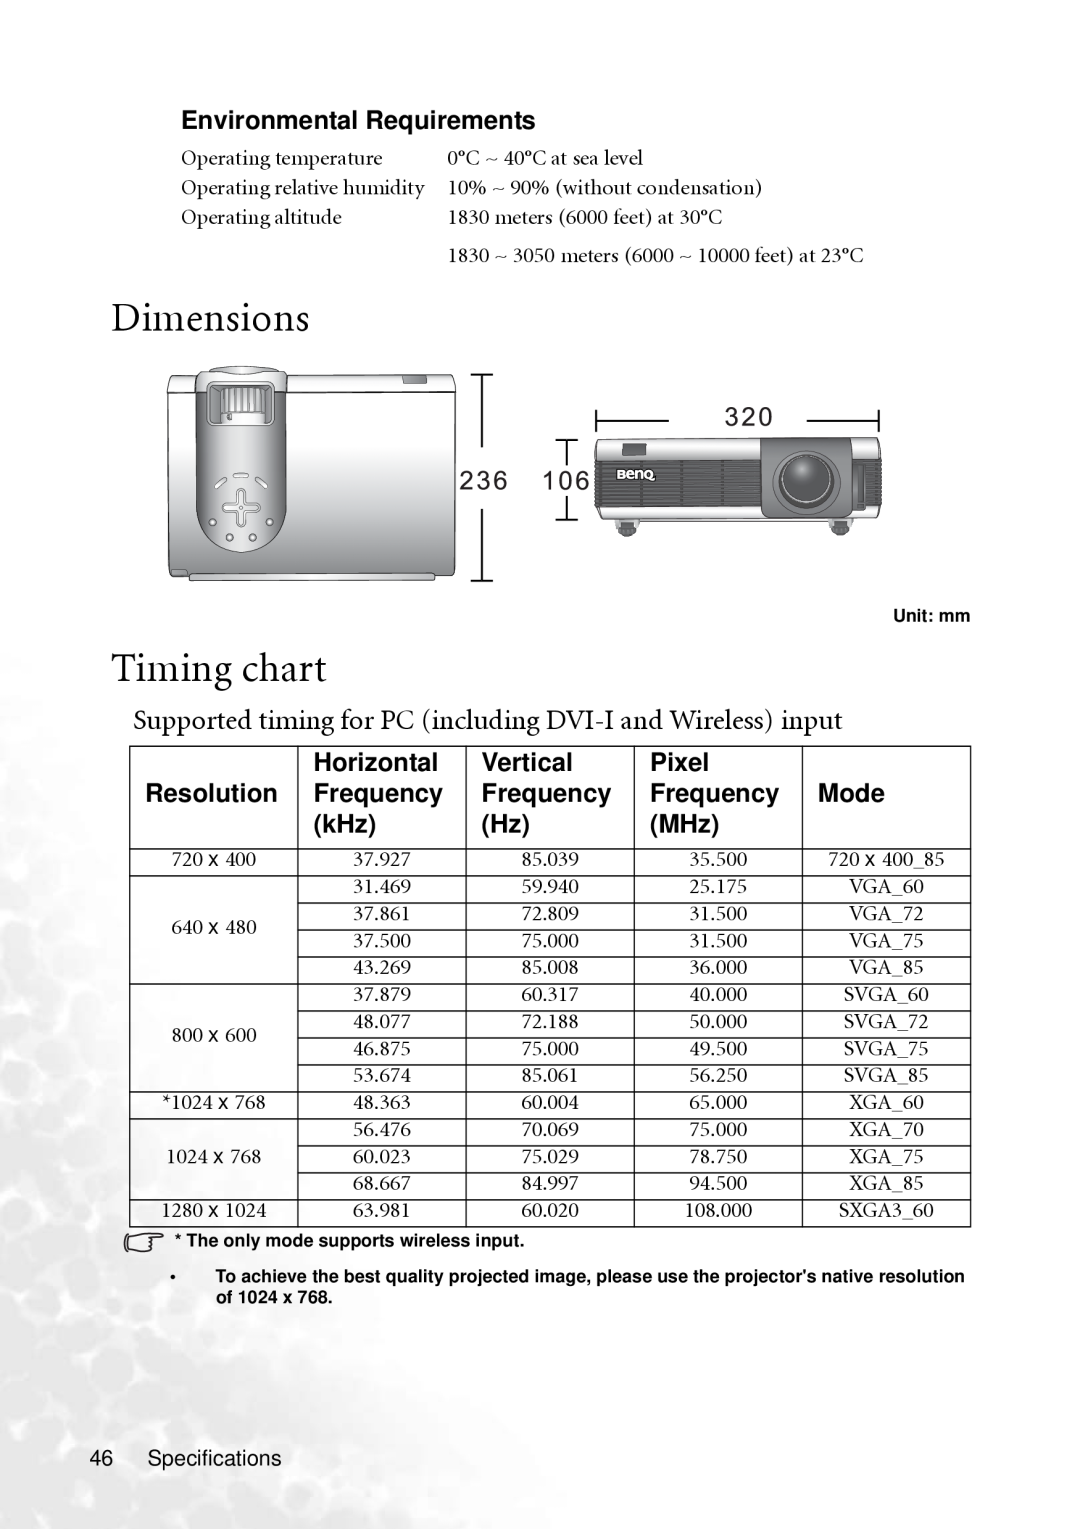 BenQ PB8260 user manual Dimensions, Timing chart, Supported timing for PC including DVI-I and Wireless input 